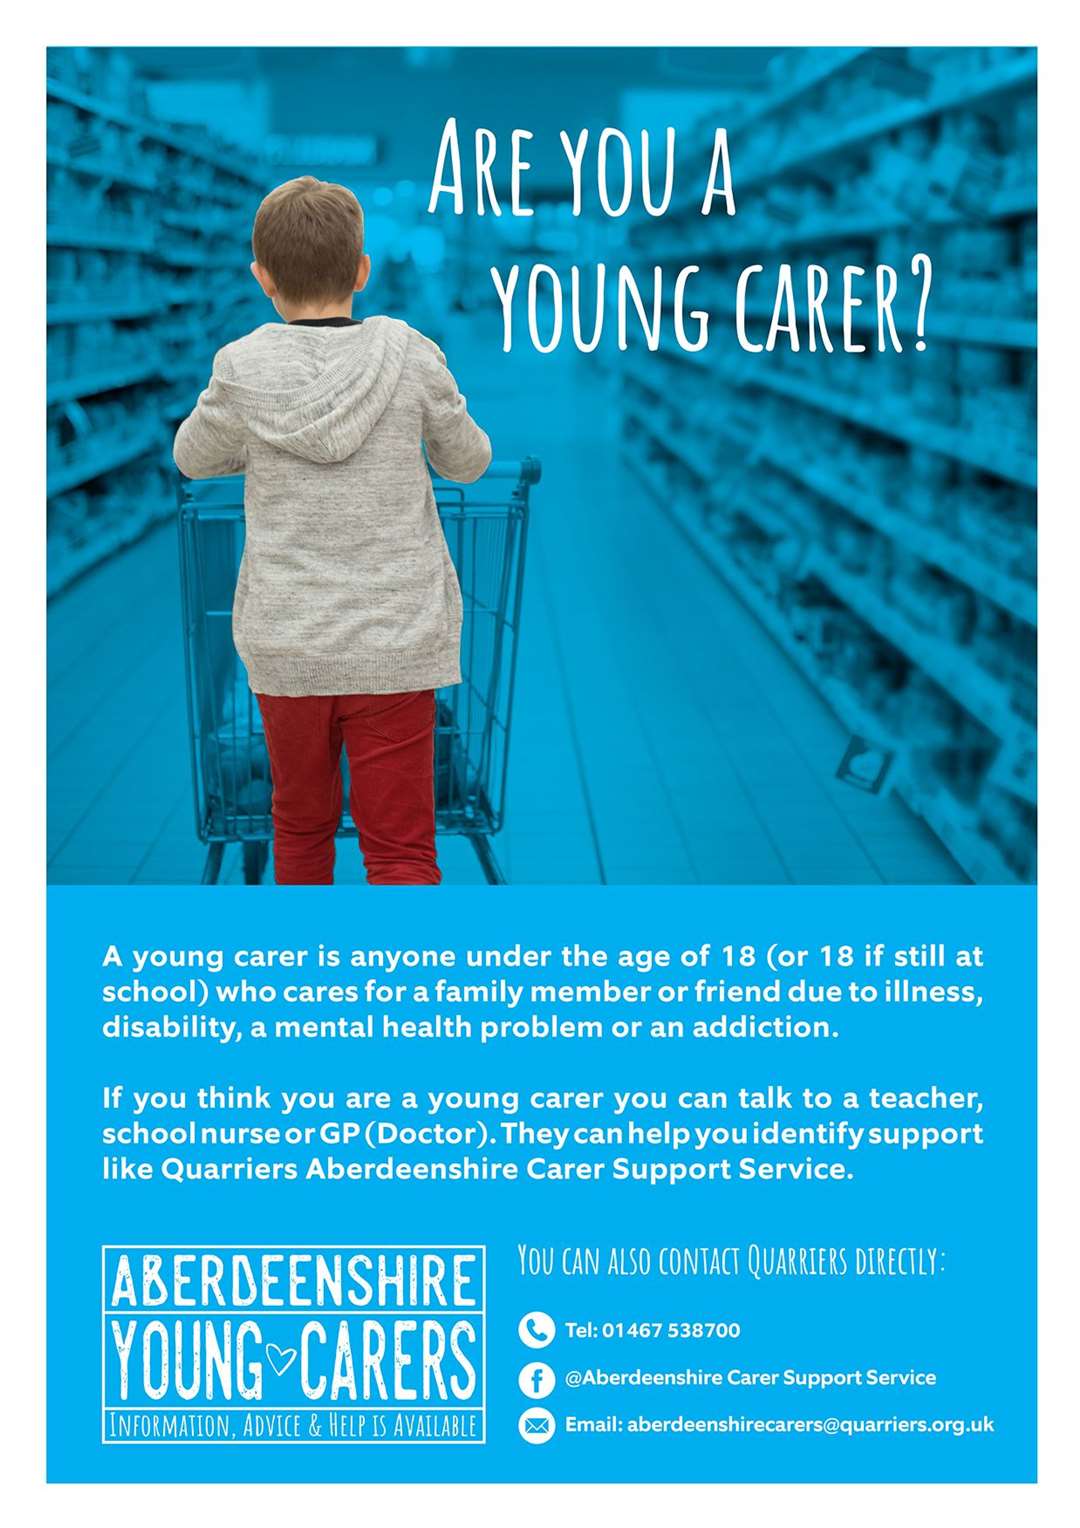 The brightly coloured leaflets and posters have been designed to raise awareness of young carers’ rights.